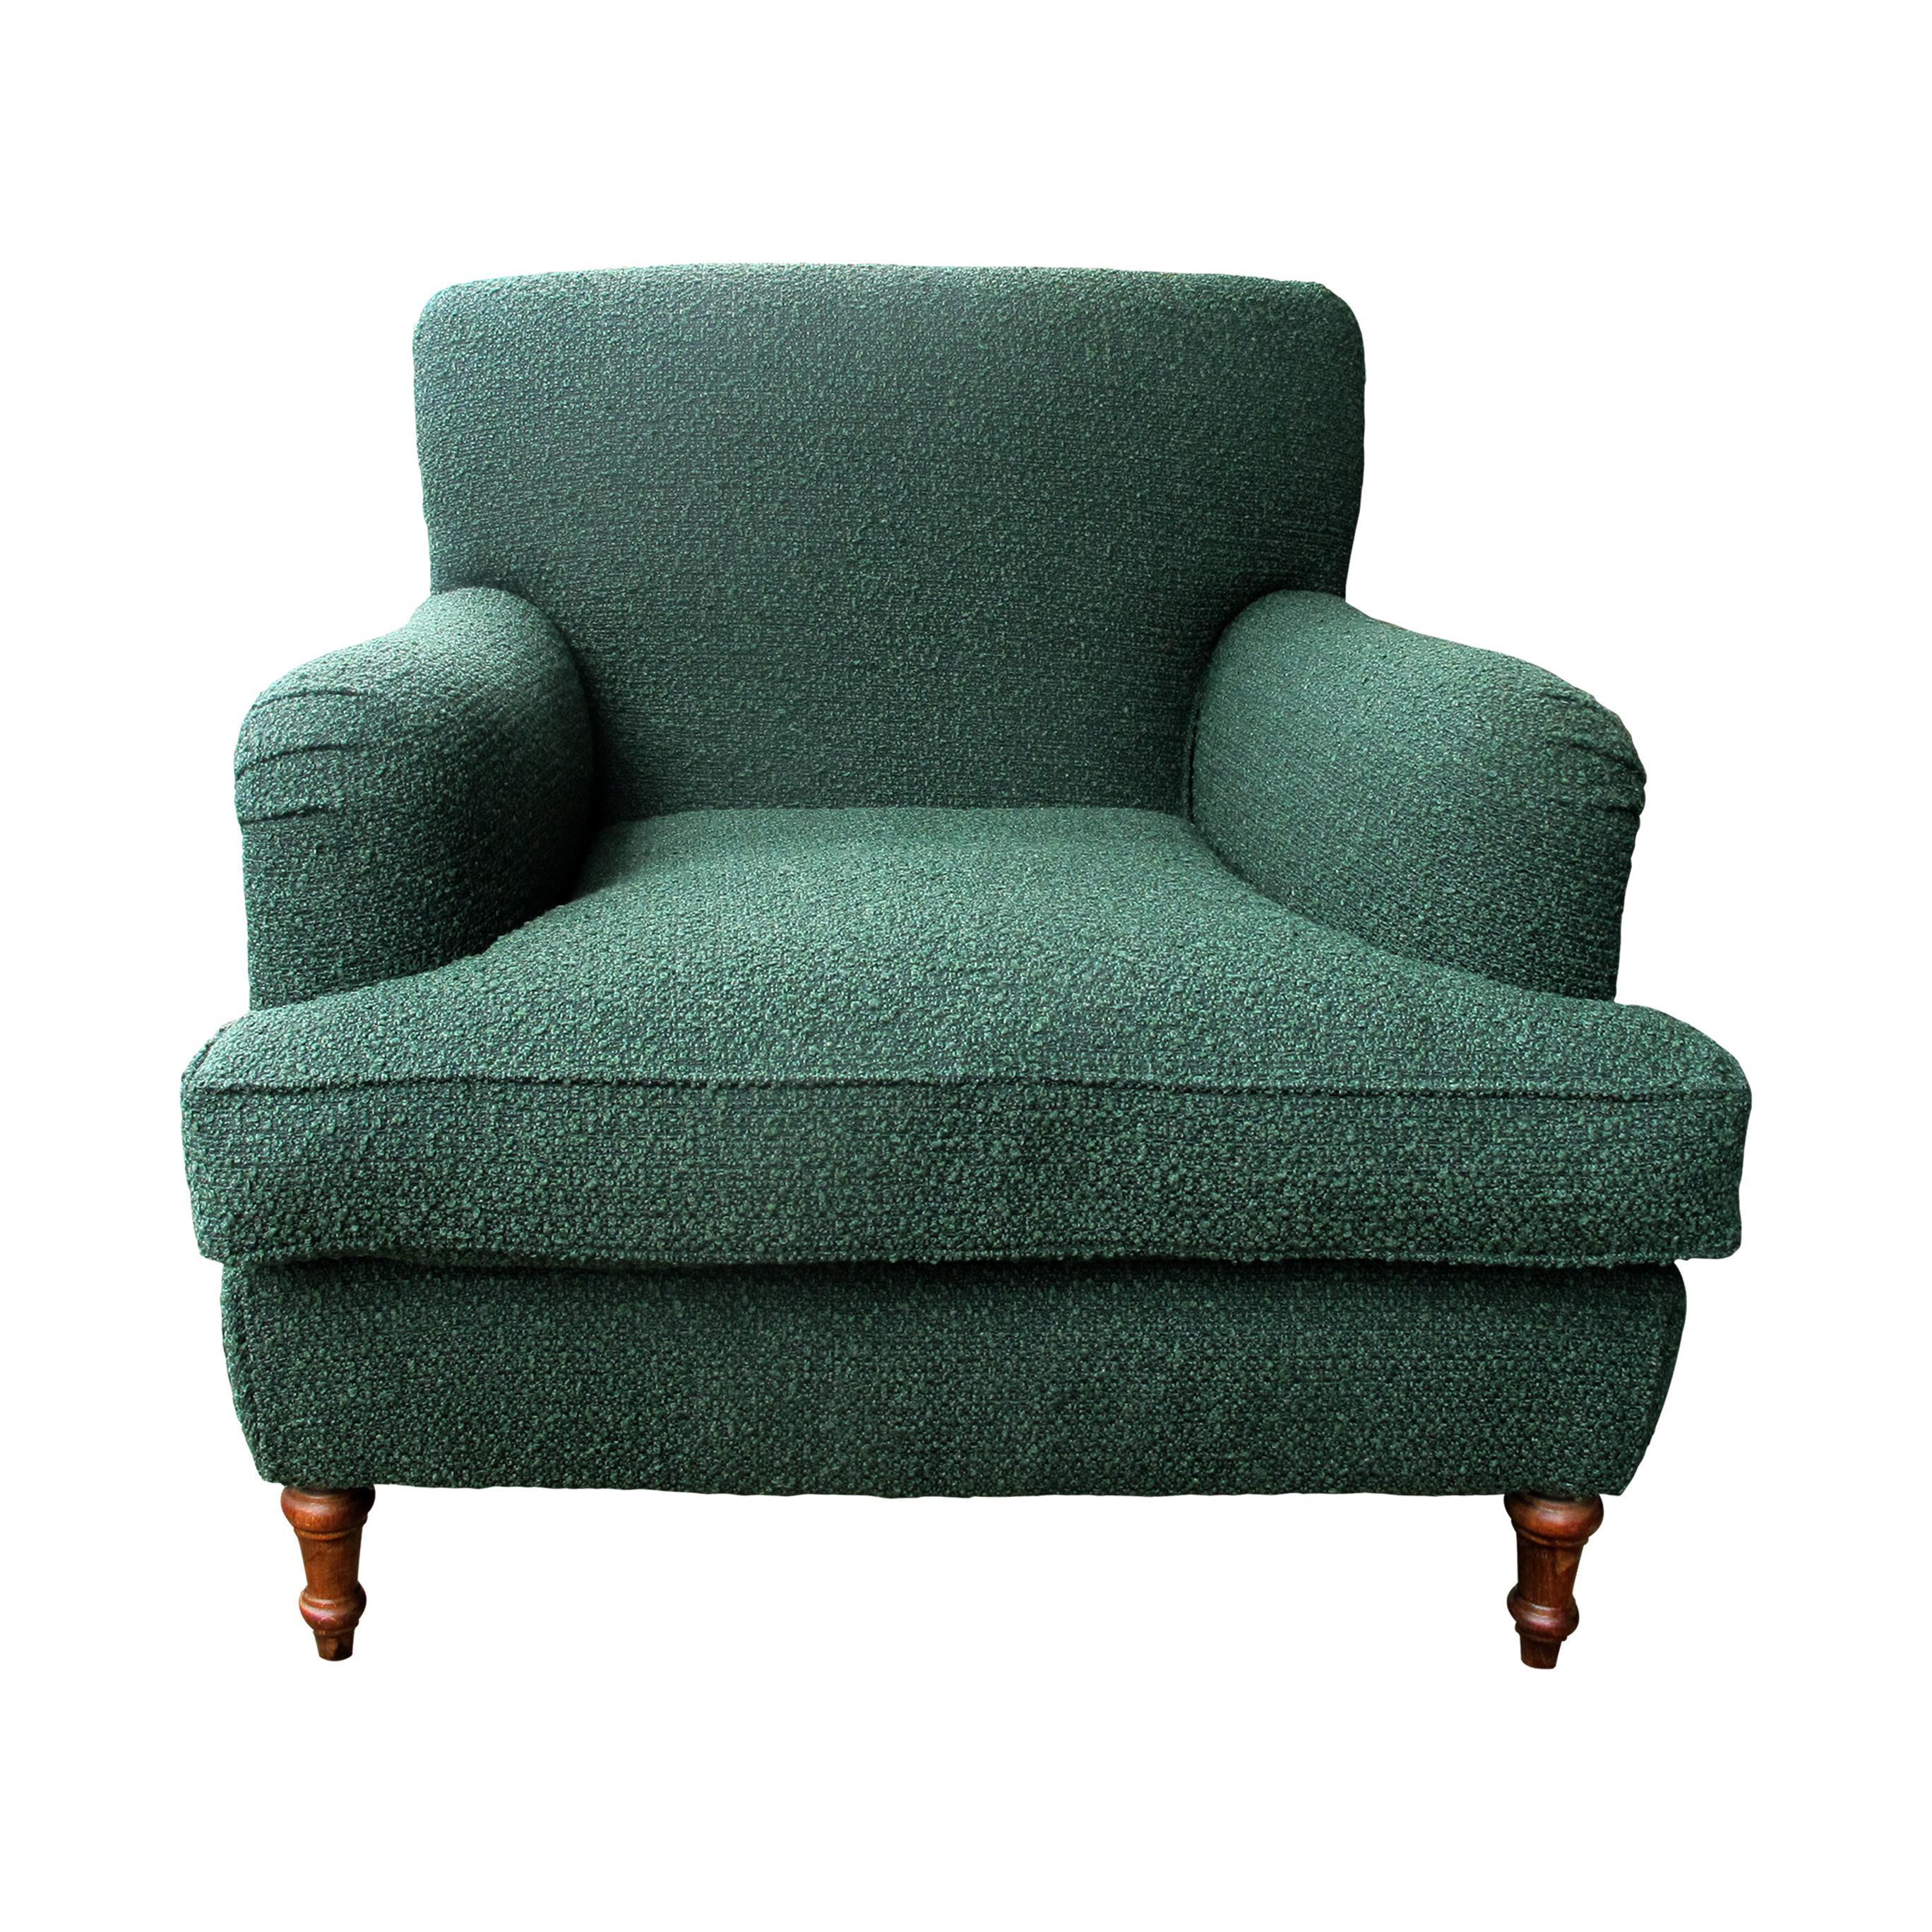 A pair of very comfortable Swedish armchairs circa 1950s/60s. These armchairs boast a generous size and are newly upholstered in soft green boucle fabric. These armchairs are supported by oak-turned wooden legs at the front adding a classic touch to